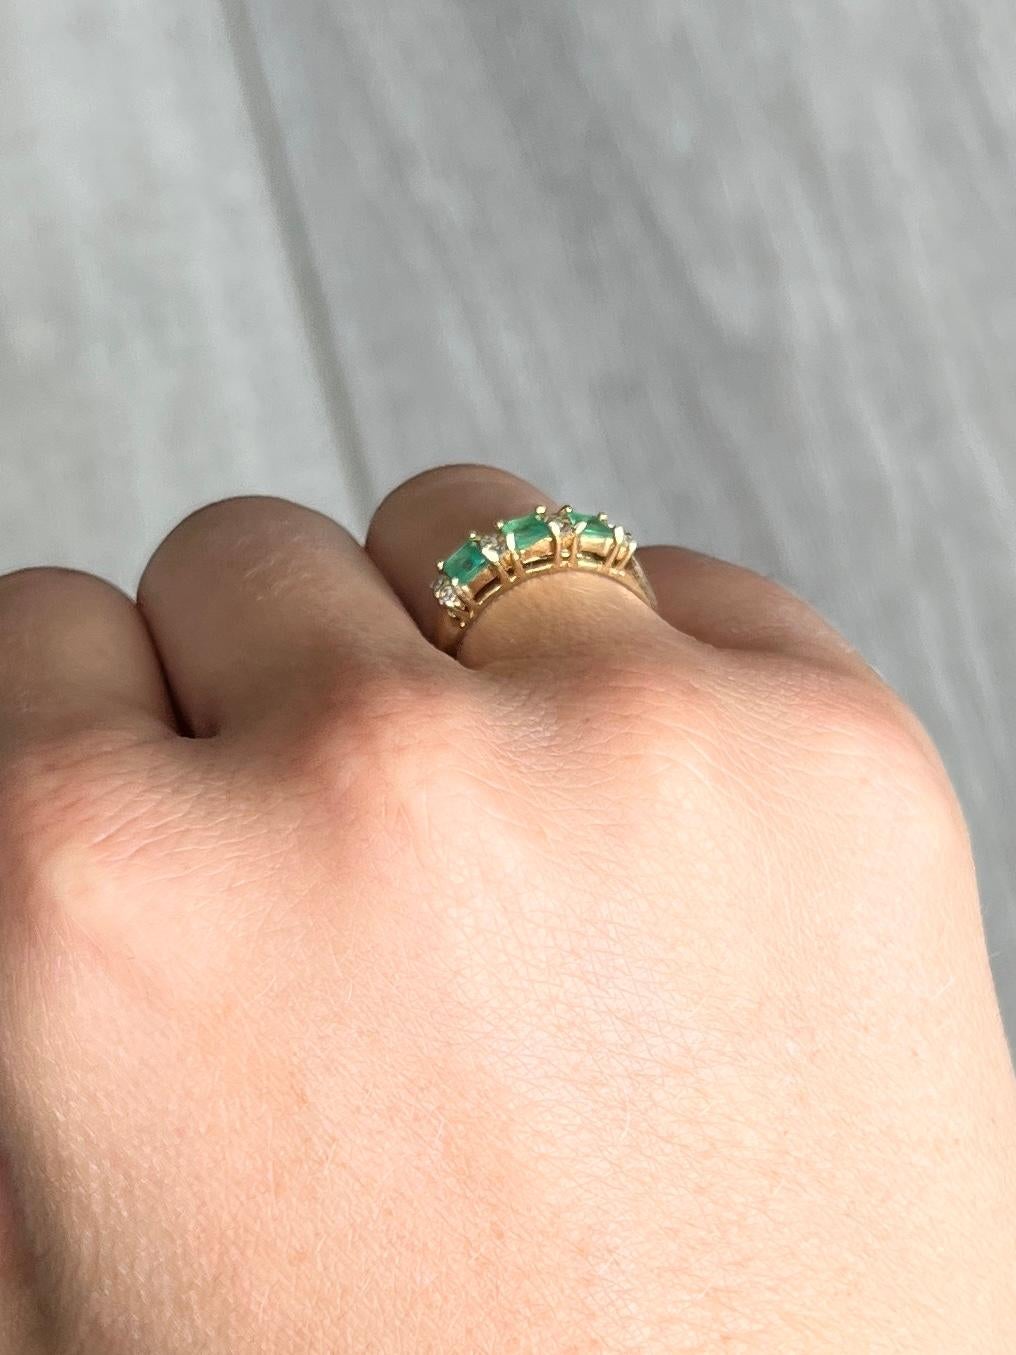 This gorgeous three stone holds three emeralds which total 45pts and in between them sit four pairs of white sapphires totalling 8pts. The ring is modelled in 9ct.

Size: J 1/2 or 5
Width: 3.5mm

Weight: 1.6g